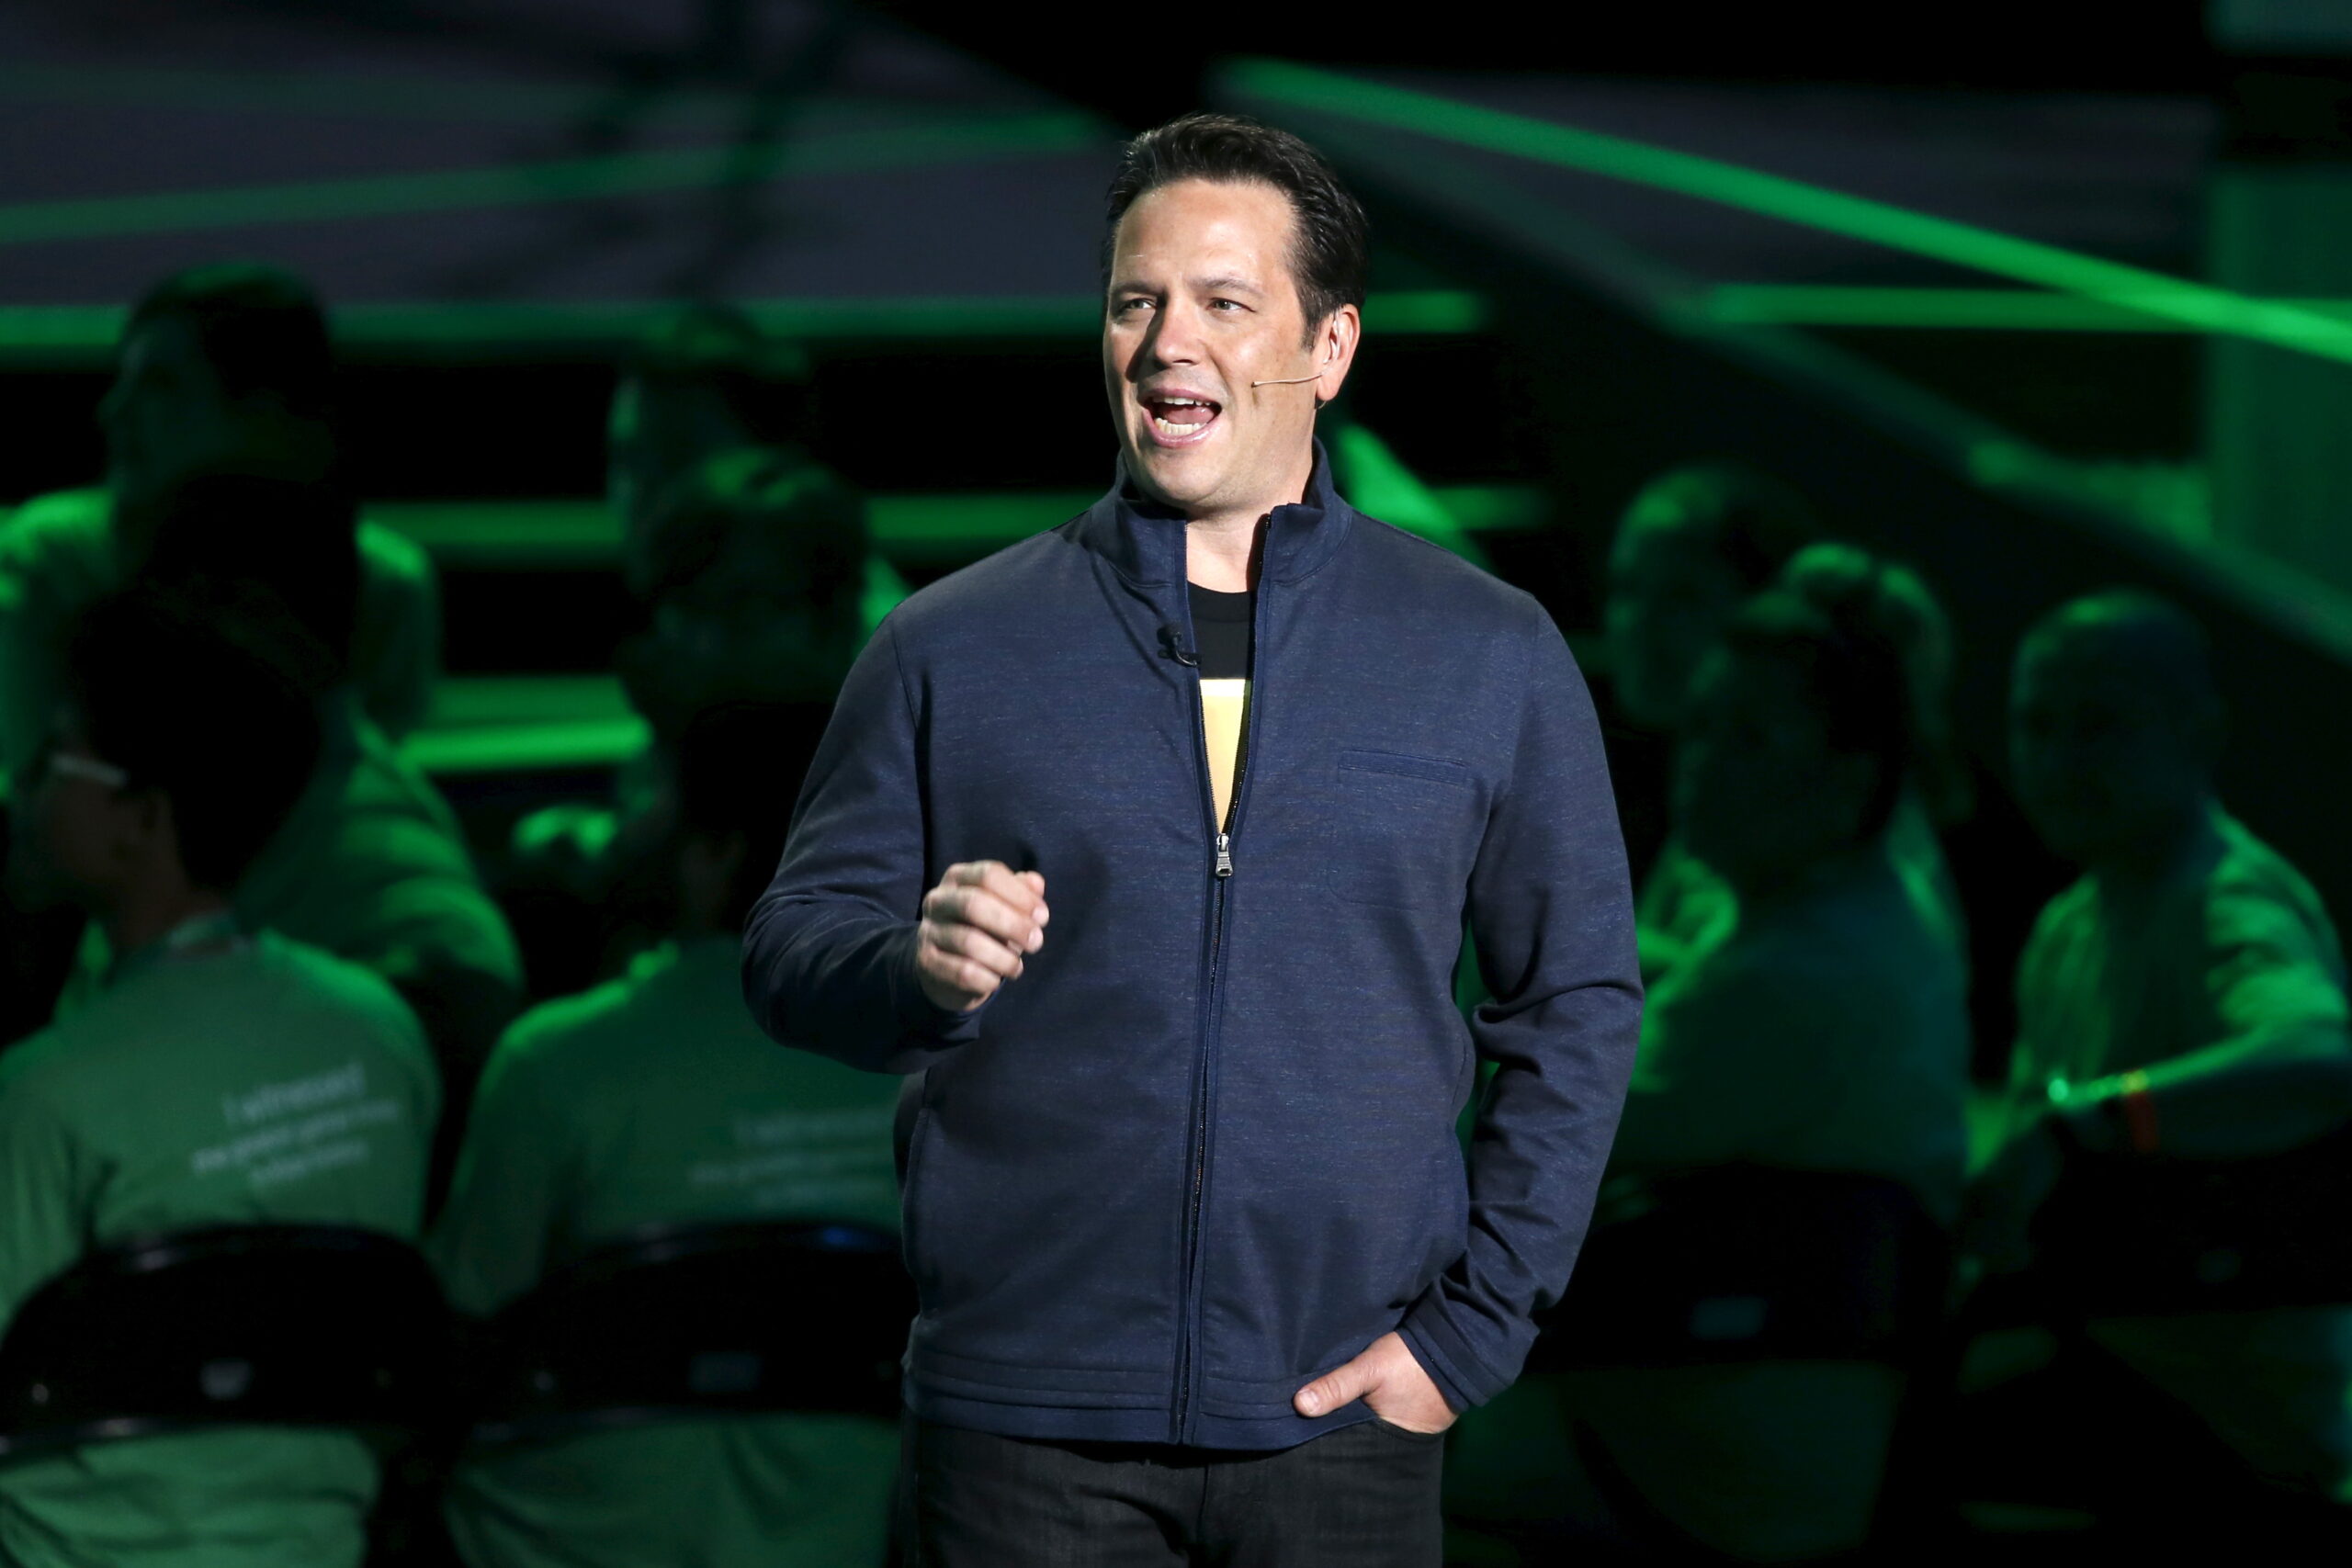 Phil Spencer, head of Xbox, announces backwards compatibility to play all Xbox 360 games on the Xbox One during game publisher Microsoft's Xbox media briefing before the opening day of the Electronic Entertainment Expo, or E3, in Los Angeles, California, United States, June 15, 2015. REUTERS/Lucy Nicholson 